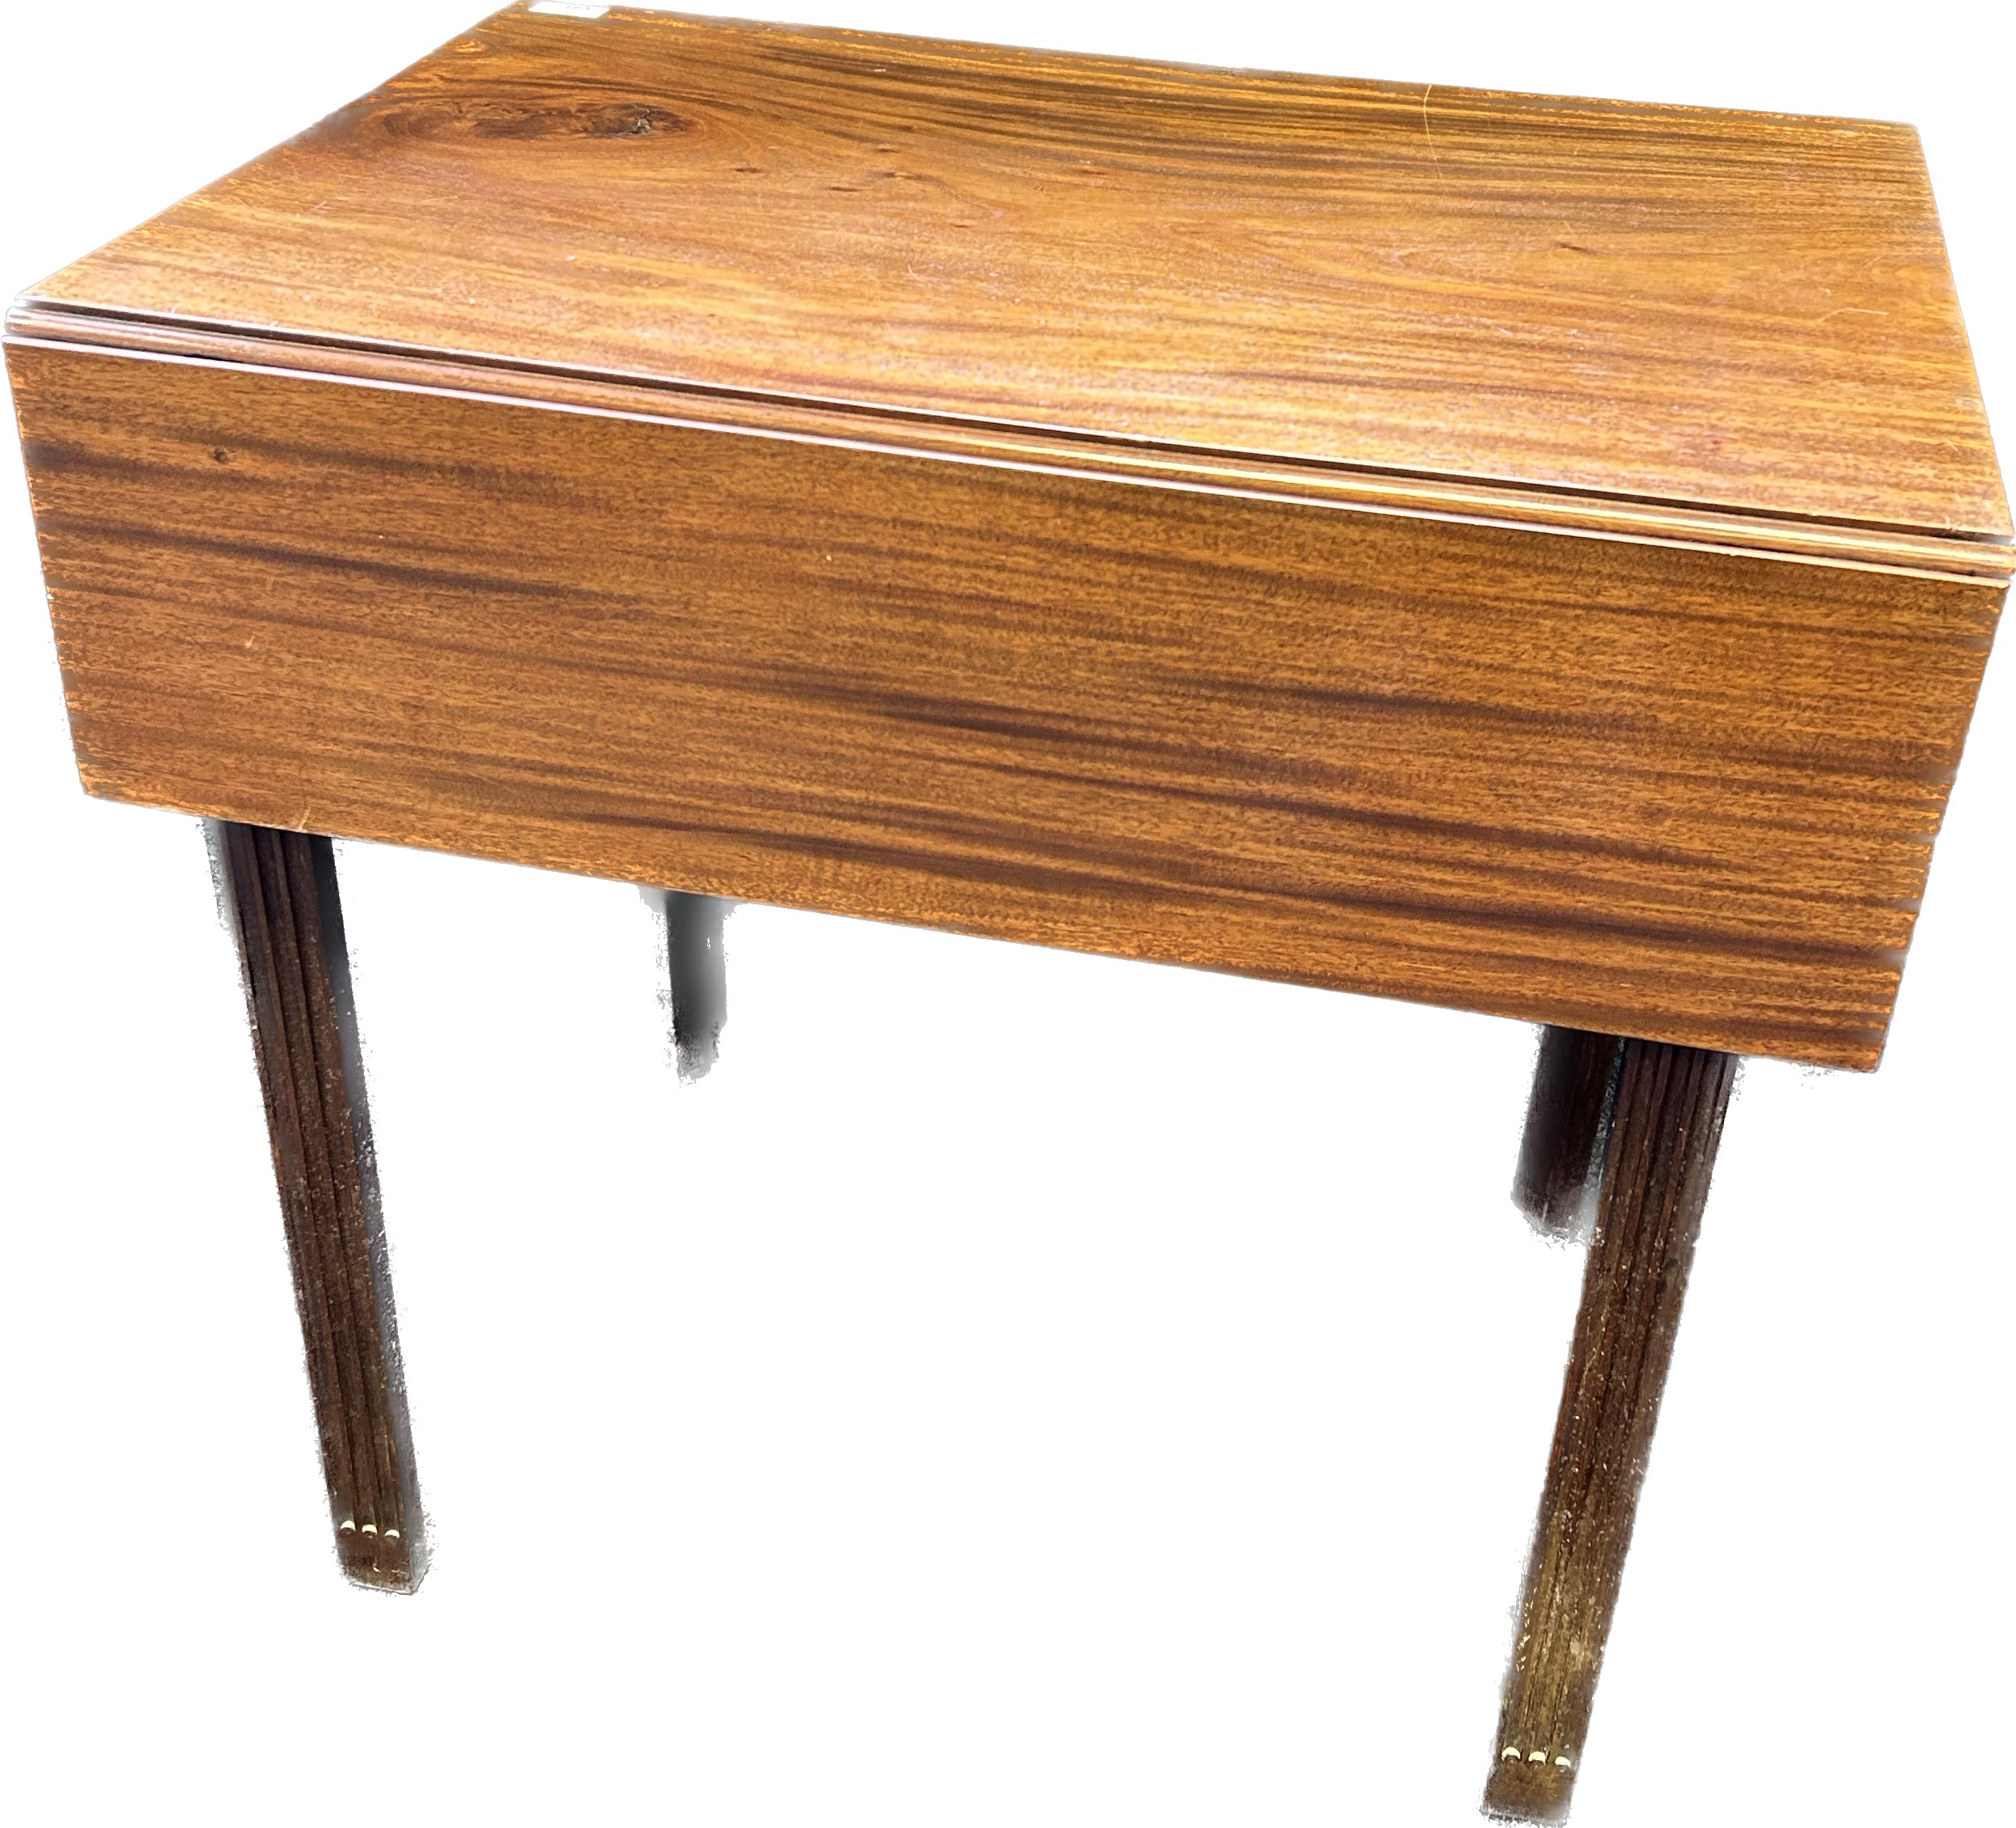 19th century mahogany Pembroke table, the rectangular top with twin drop leaf sides above a frieze - Image 4 of 4